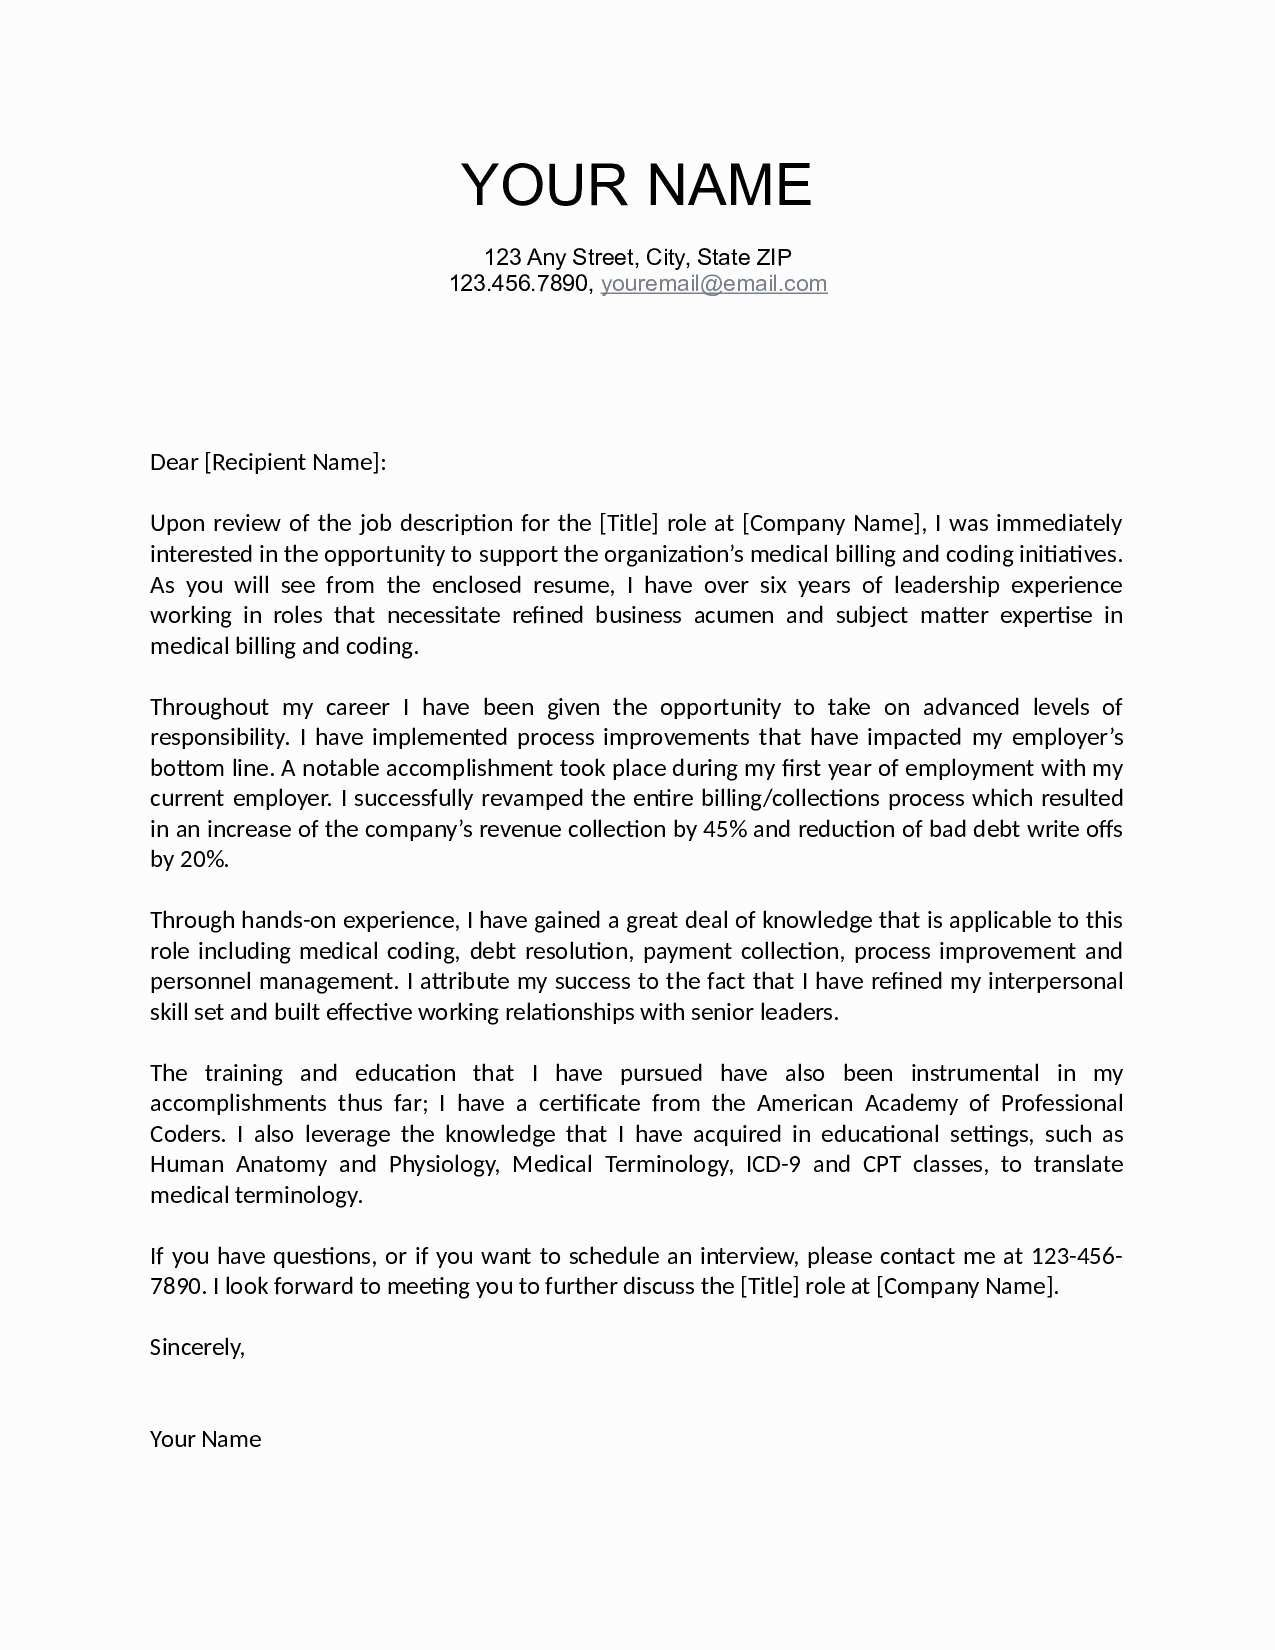 Cover Letter Template for Retail Job - Template Cover Letter Inspirational Sample Cover Letter for